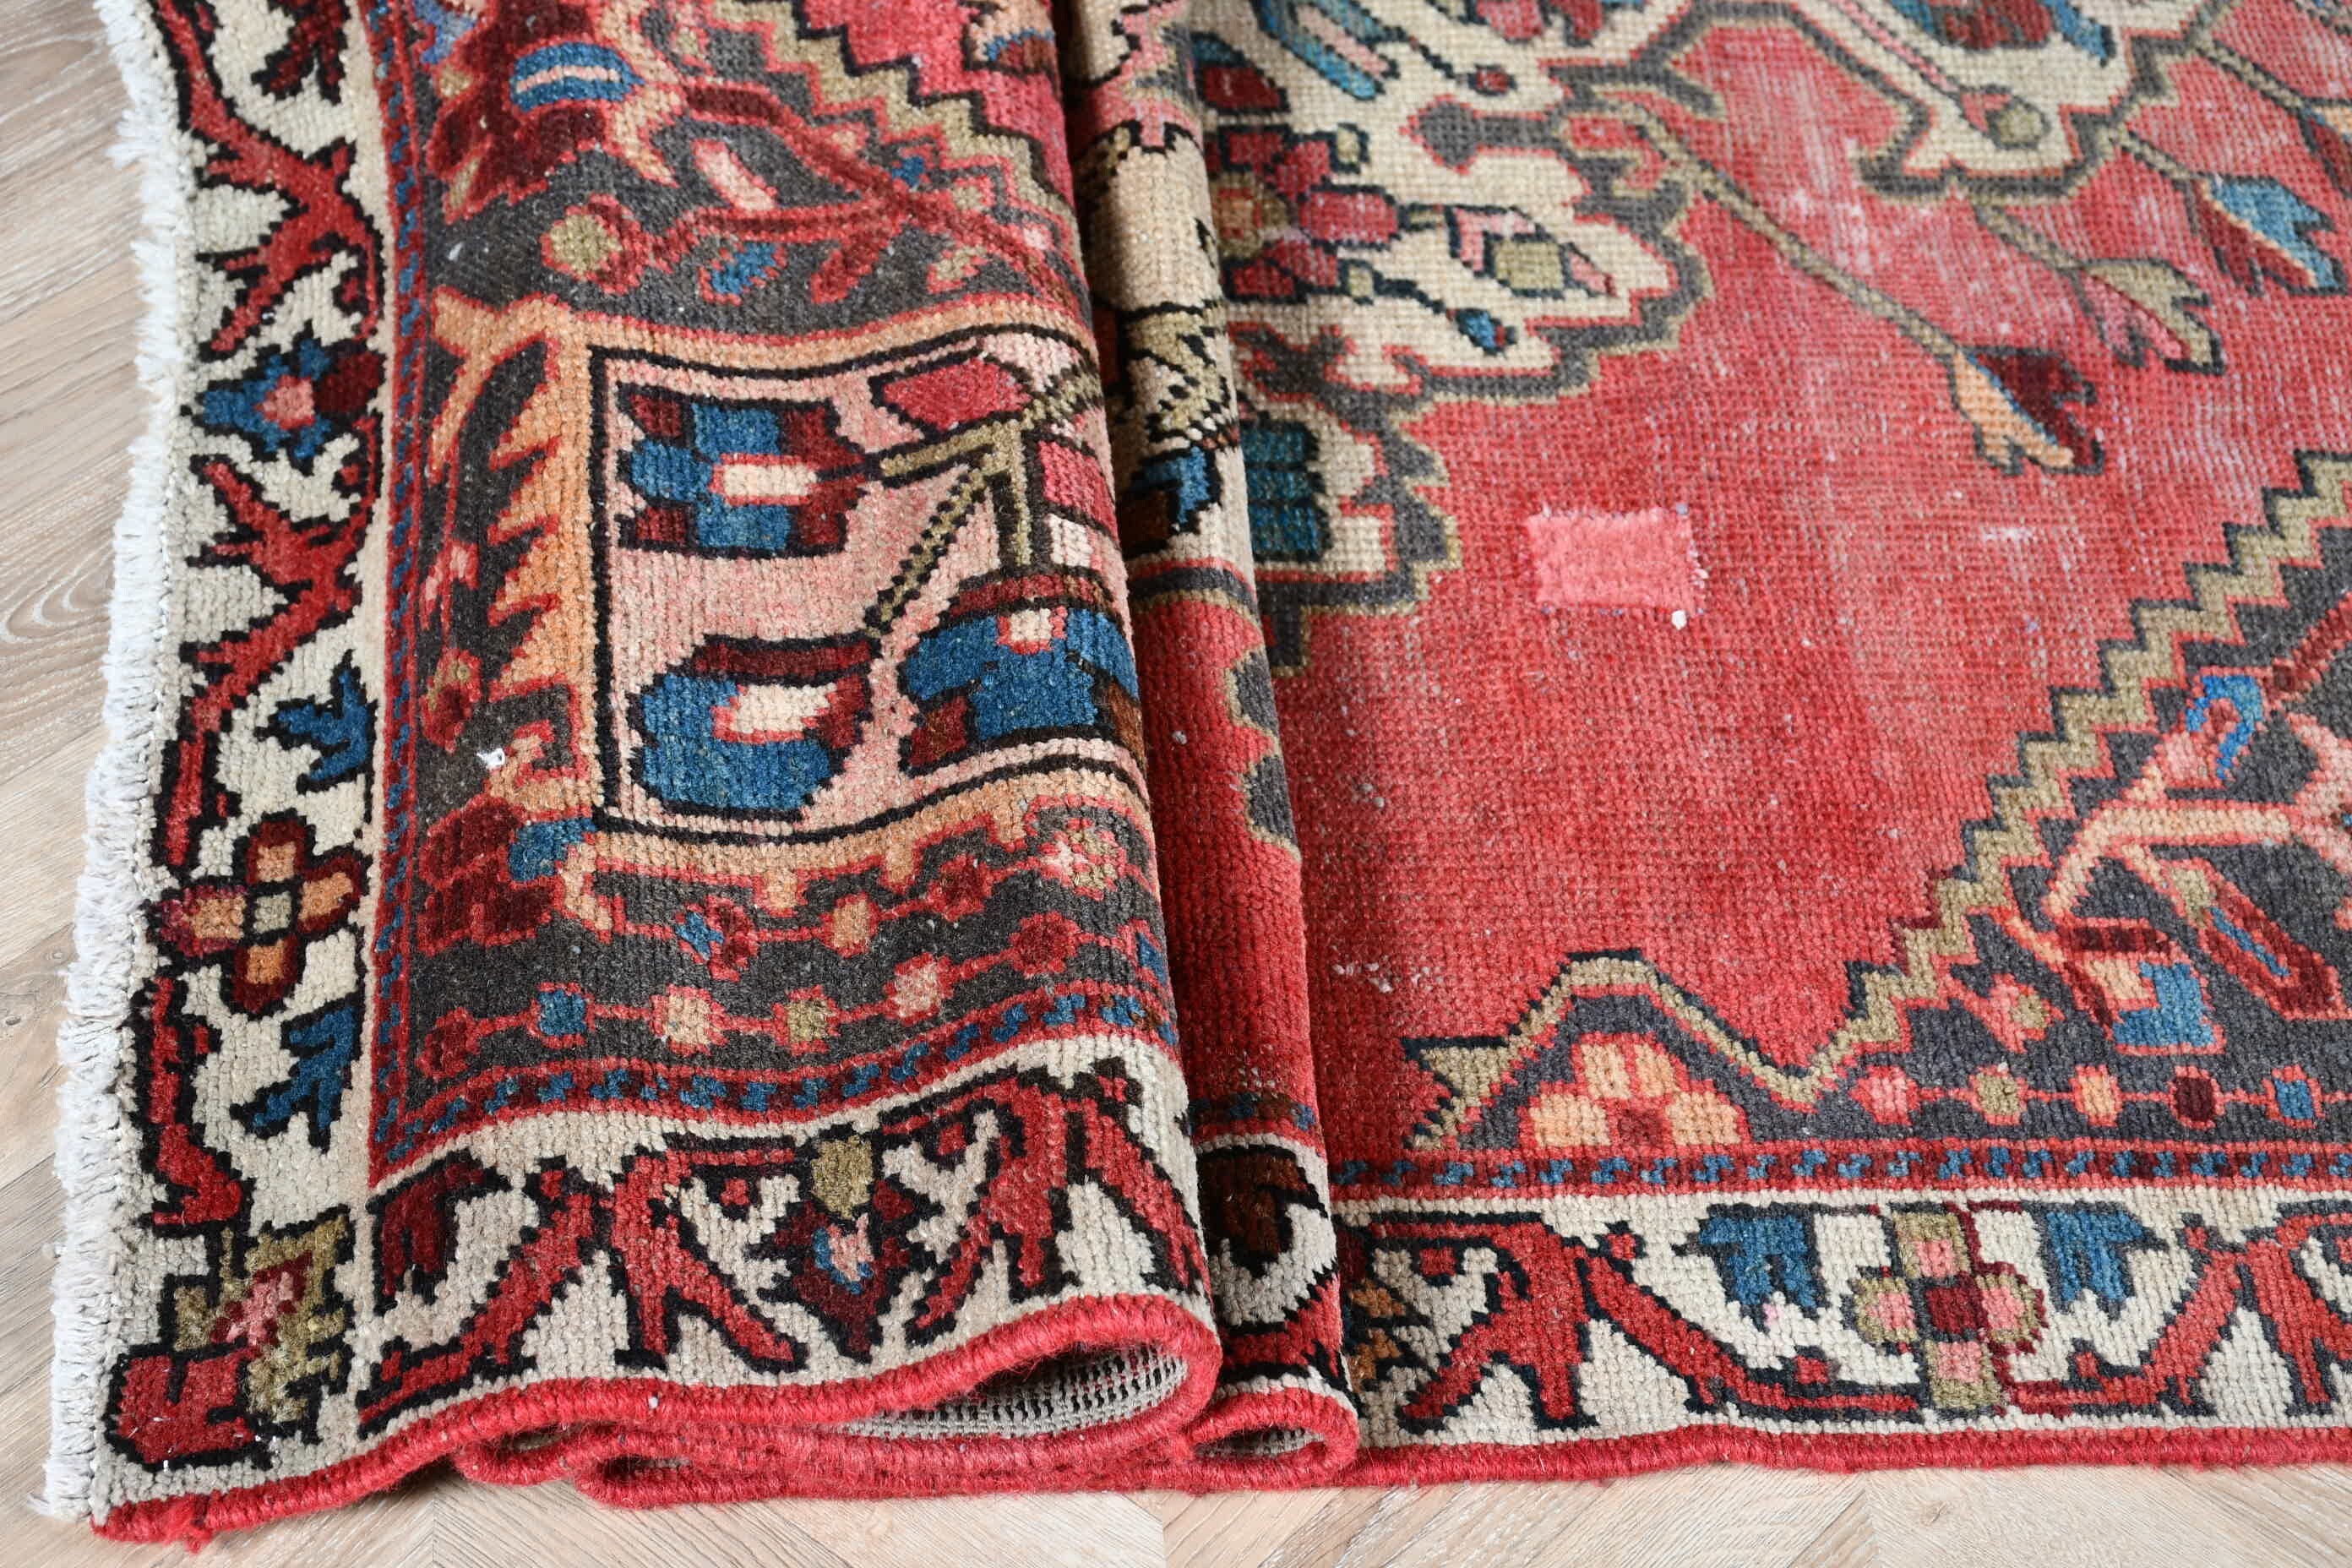 Turkish Rugs, Red Kitchen Rug, Rugs for Area, Dining Room Rug, Moroccan Rug, Antique Rug, Vintage Rug, Pale Rug, 4.1x6.4 ft Area Rugs